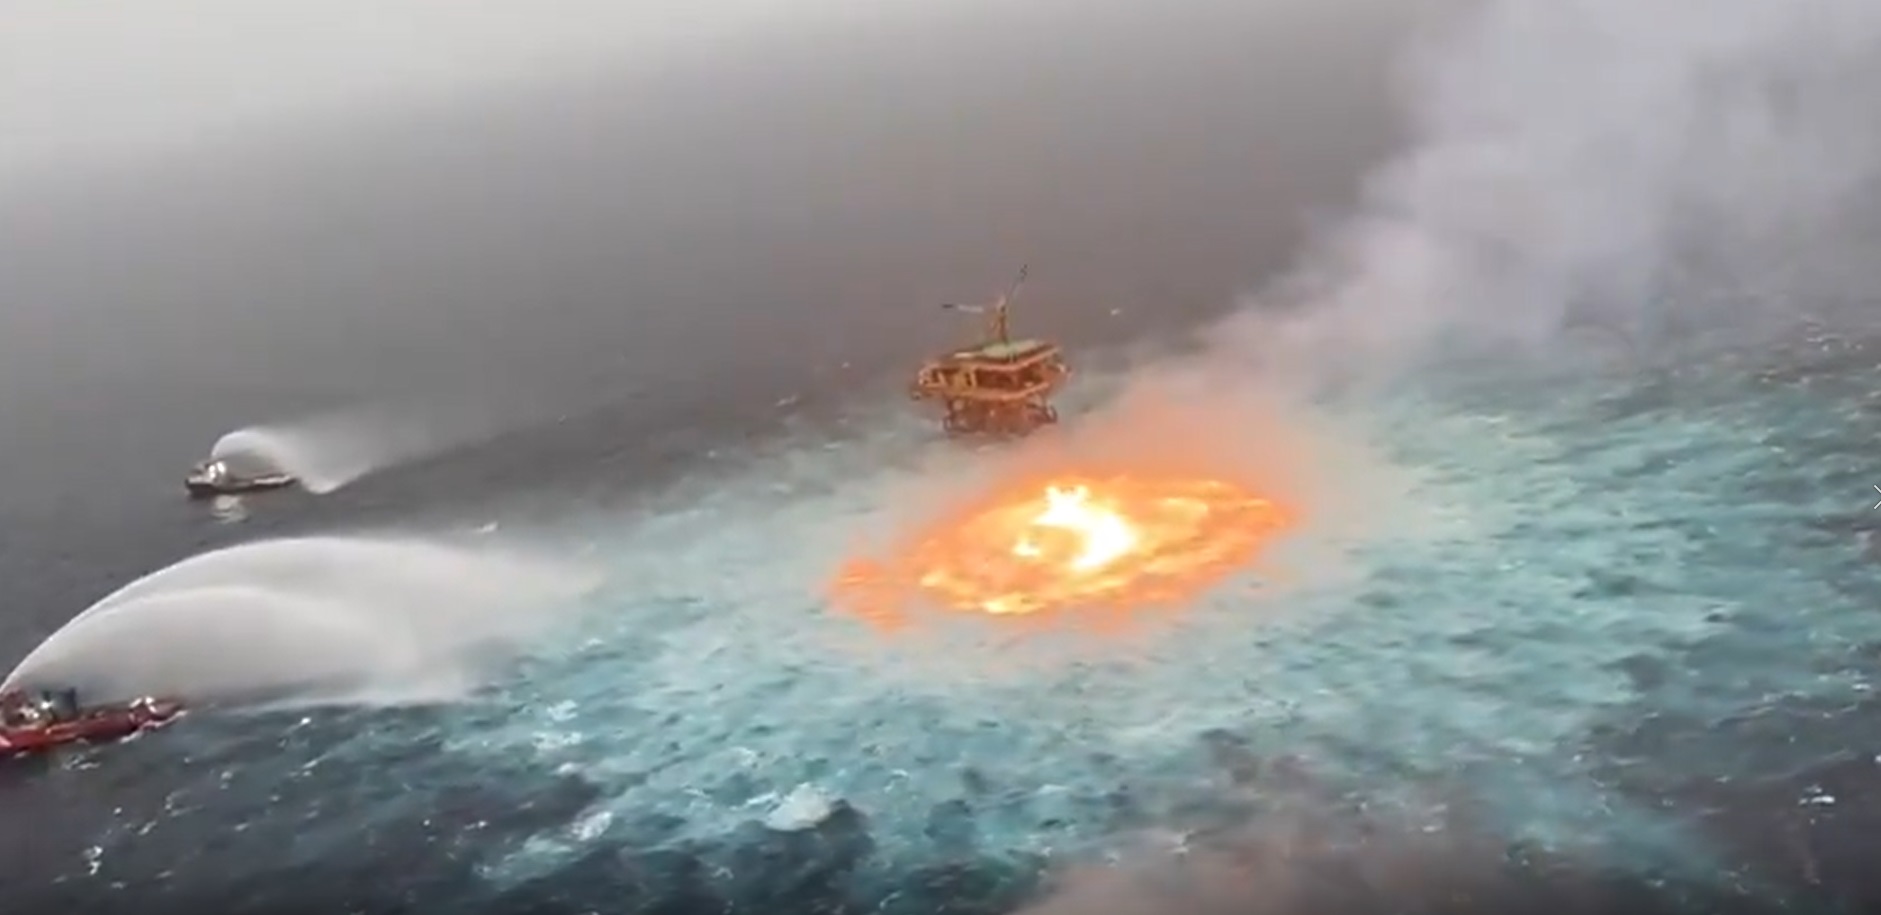 Undersea gas pipeline rupture causes fire in the Gulf of Mexico